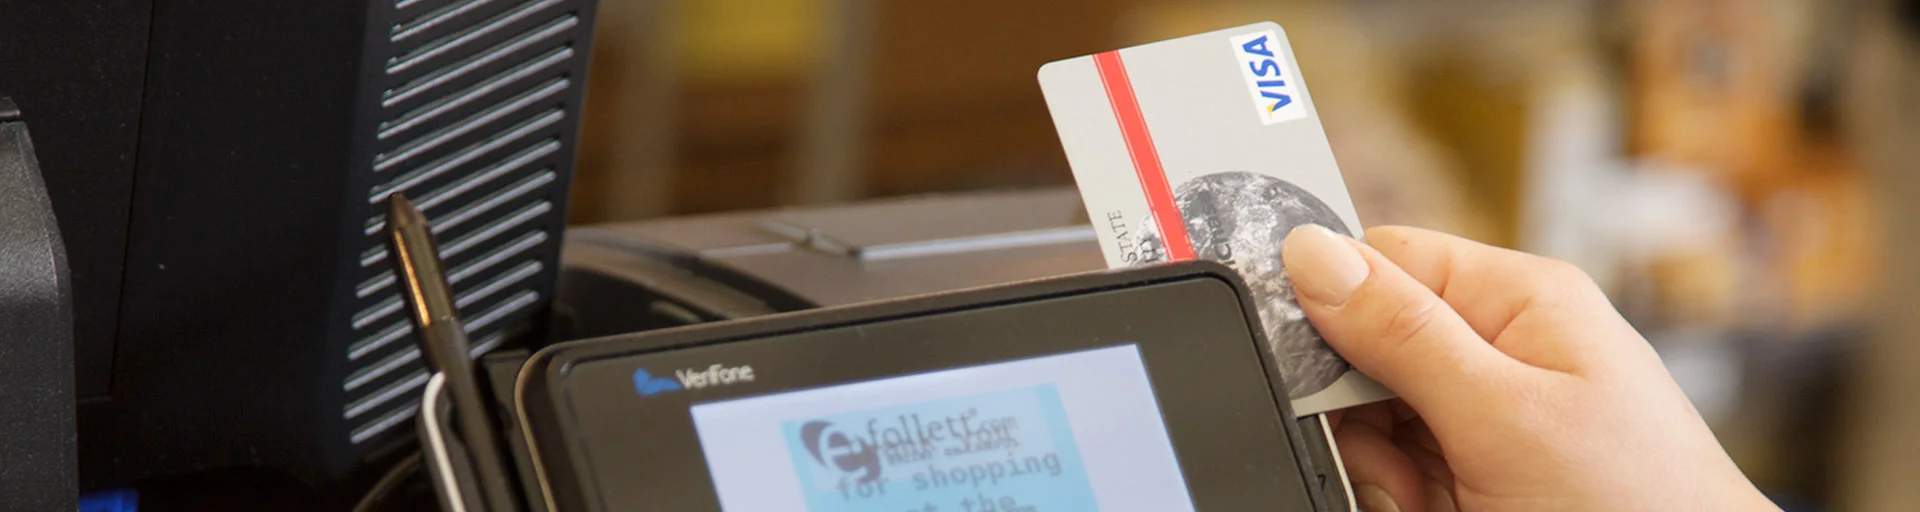 A Purchasing card being used on a store card reader